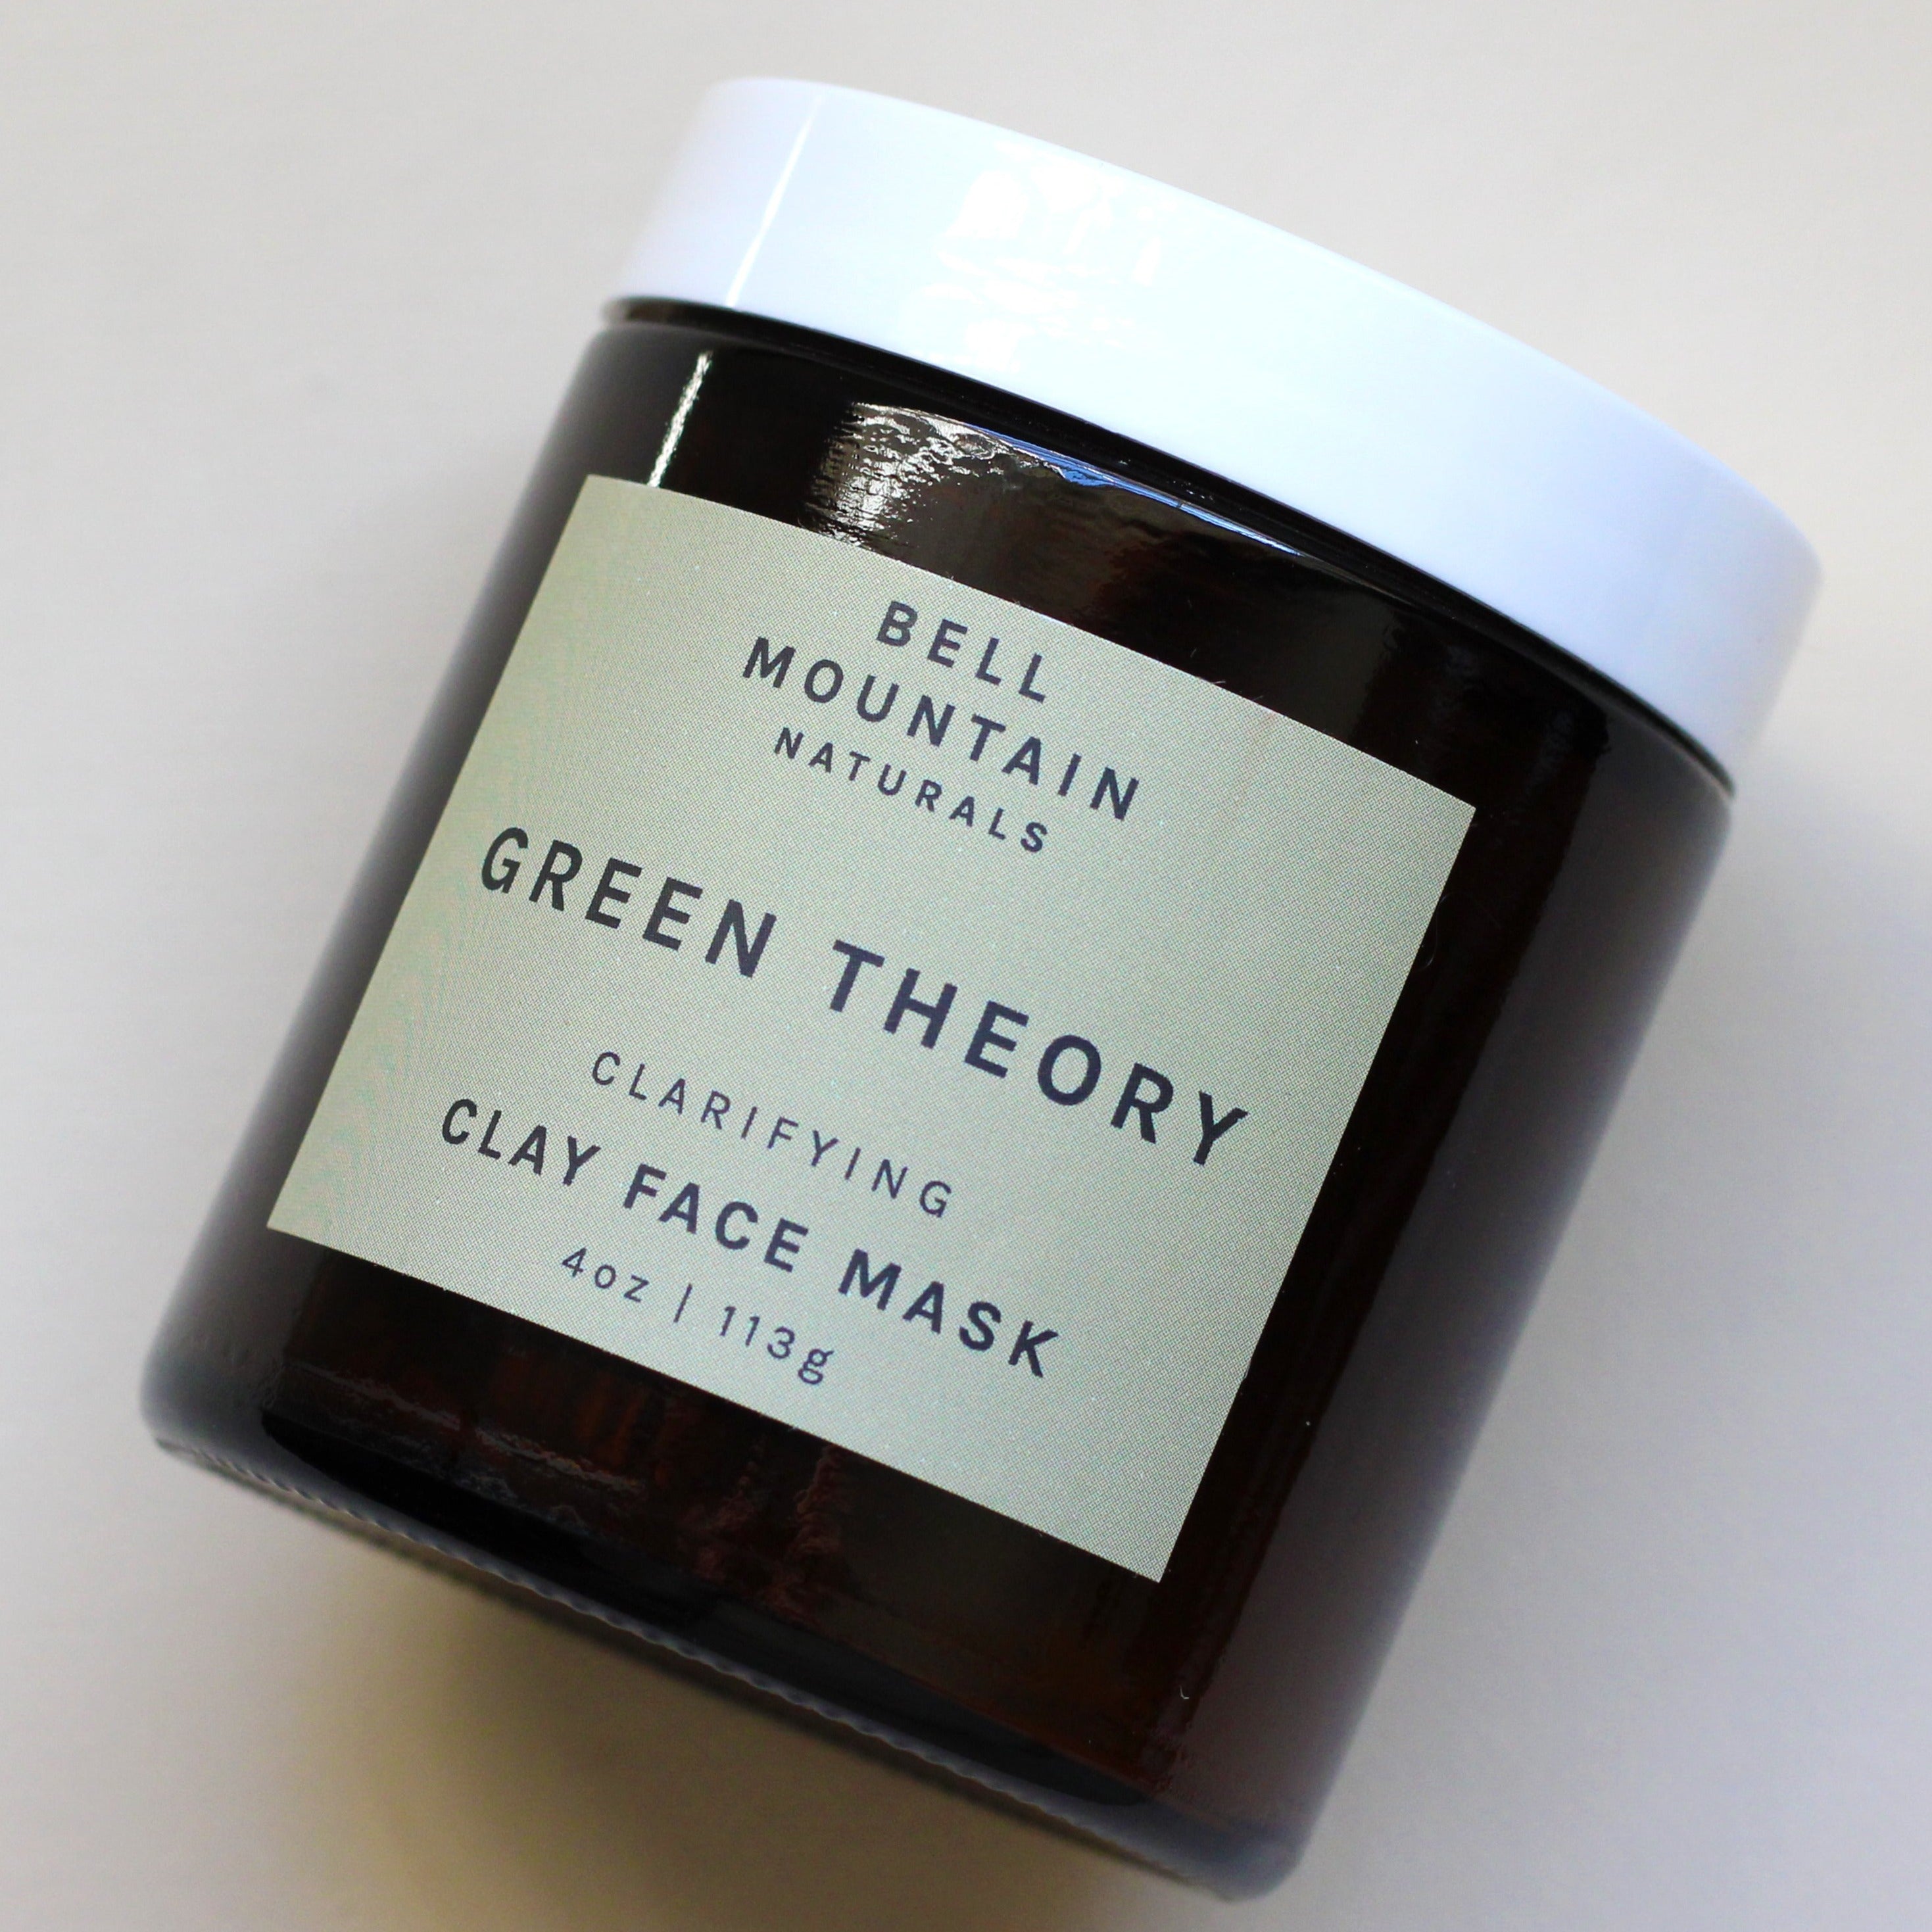 Bell Mountain Nautrals Green Theory Clay Face Mask | Well-Taylored Co.